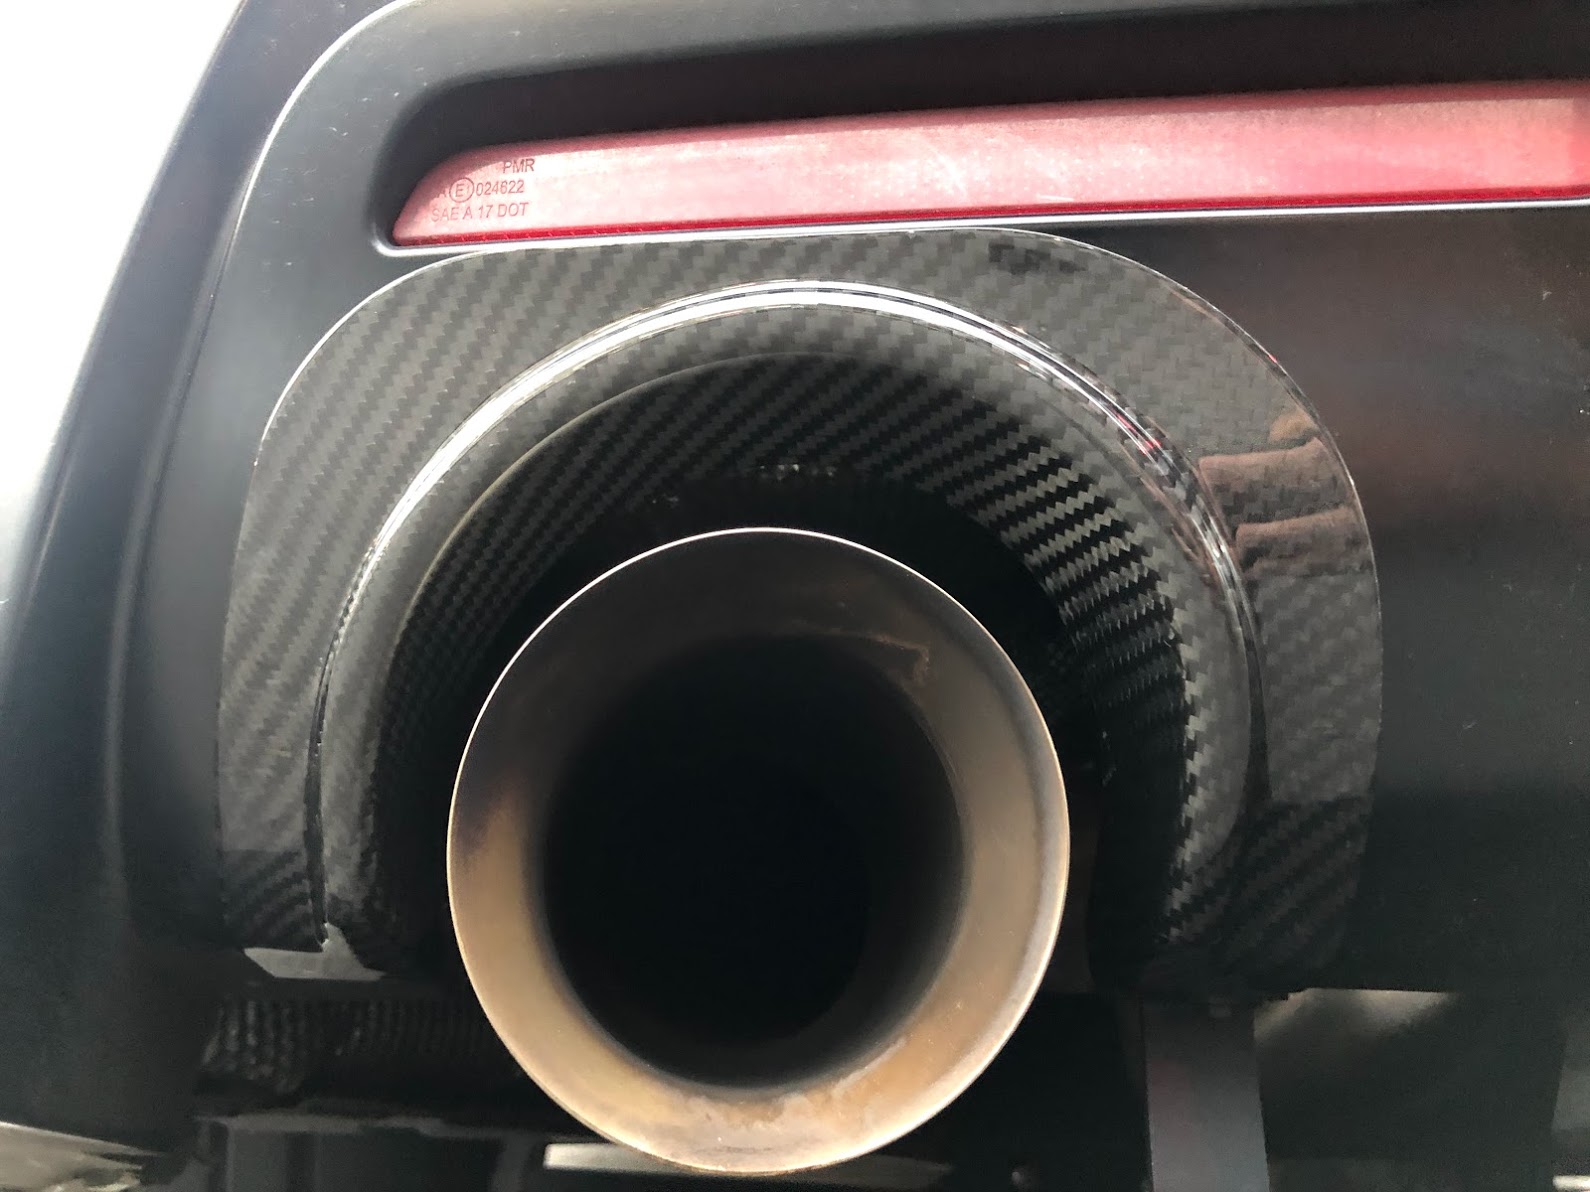 2020 up Supra Carbon rear exhaust shields